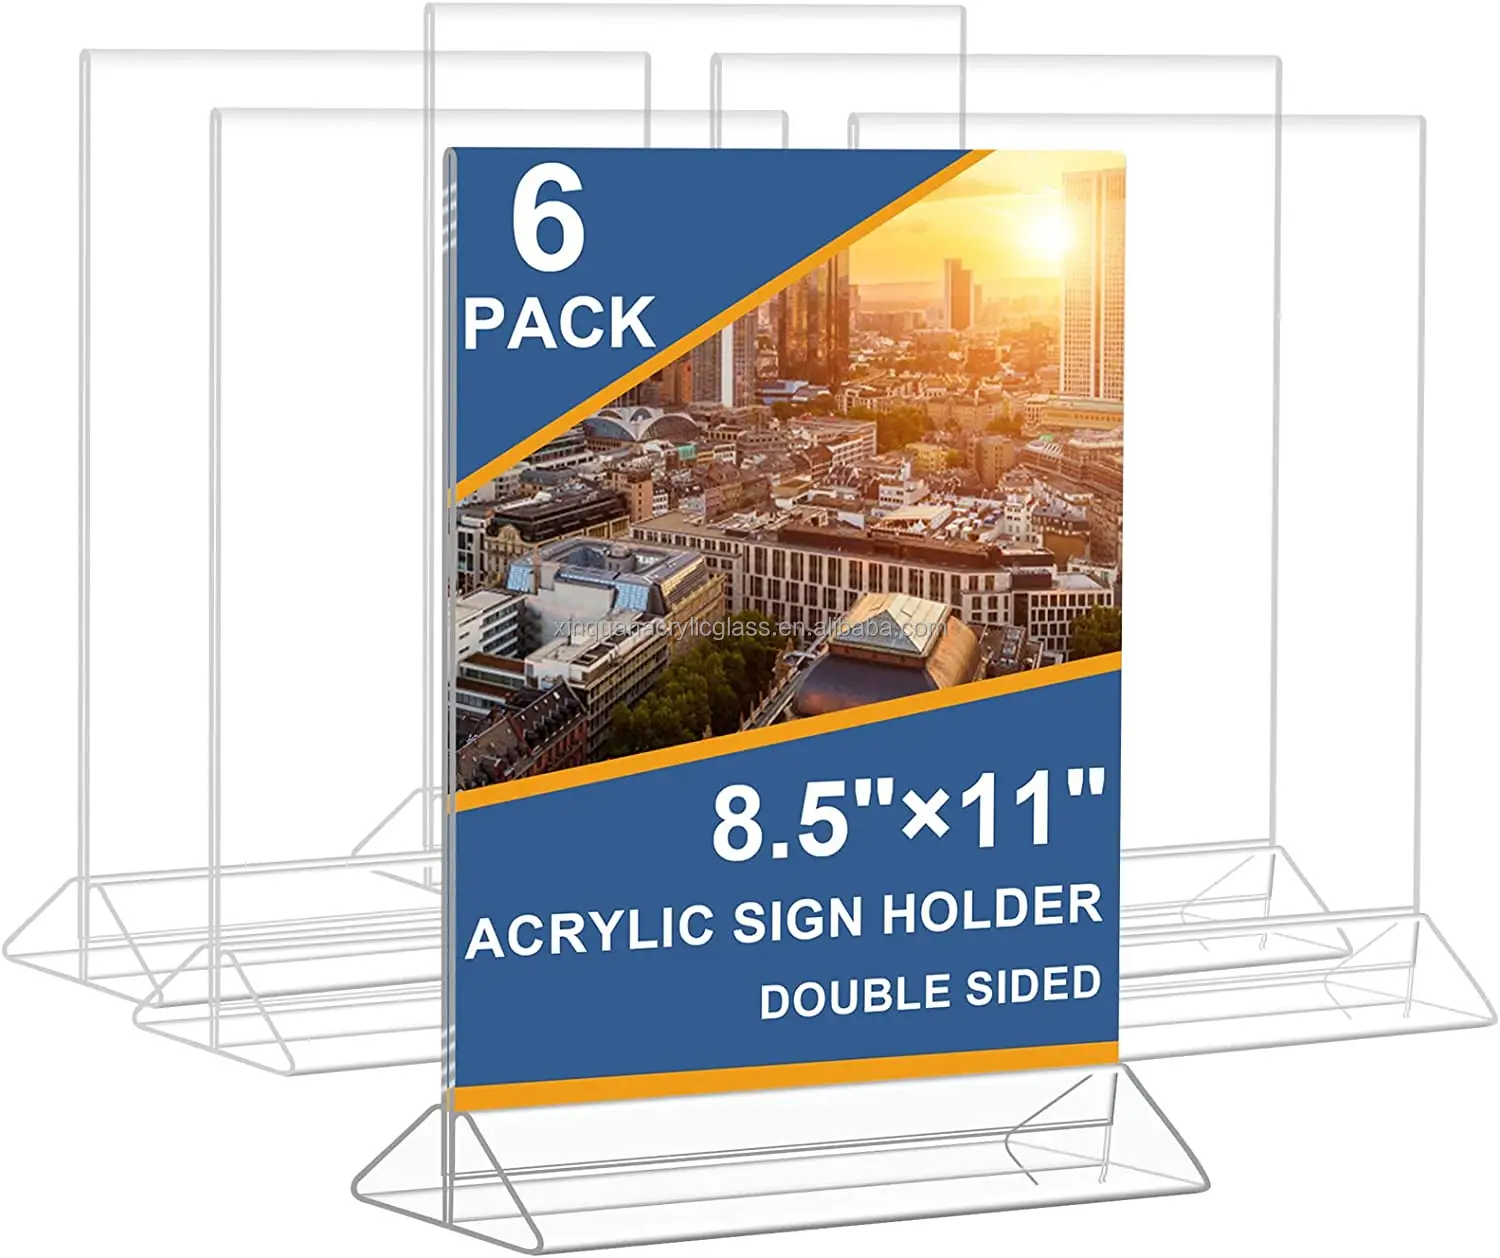 Custom Acrylic Sign Holder, Picture Frame Double Sided Flyer Holder, Clear Menu Holder Display Stand for Home Office Restaurants